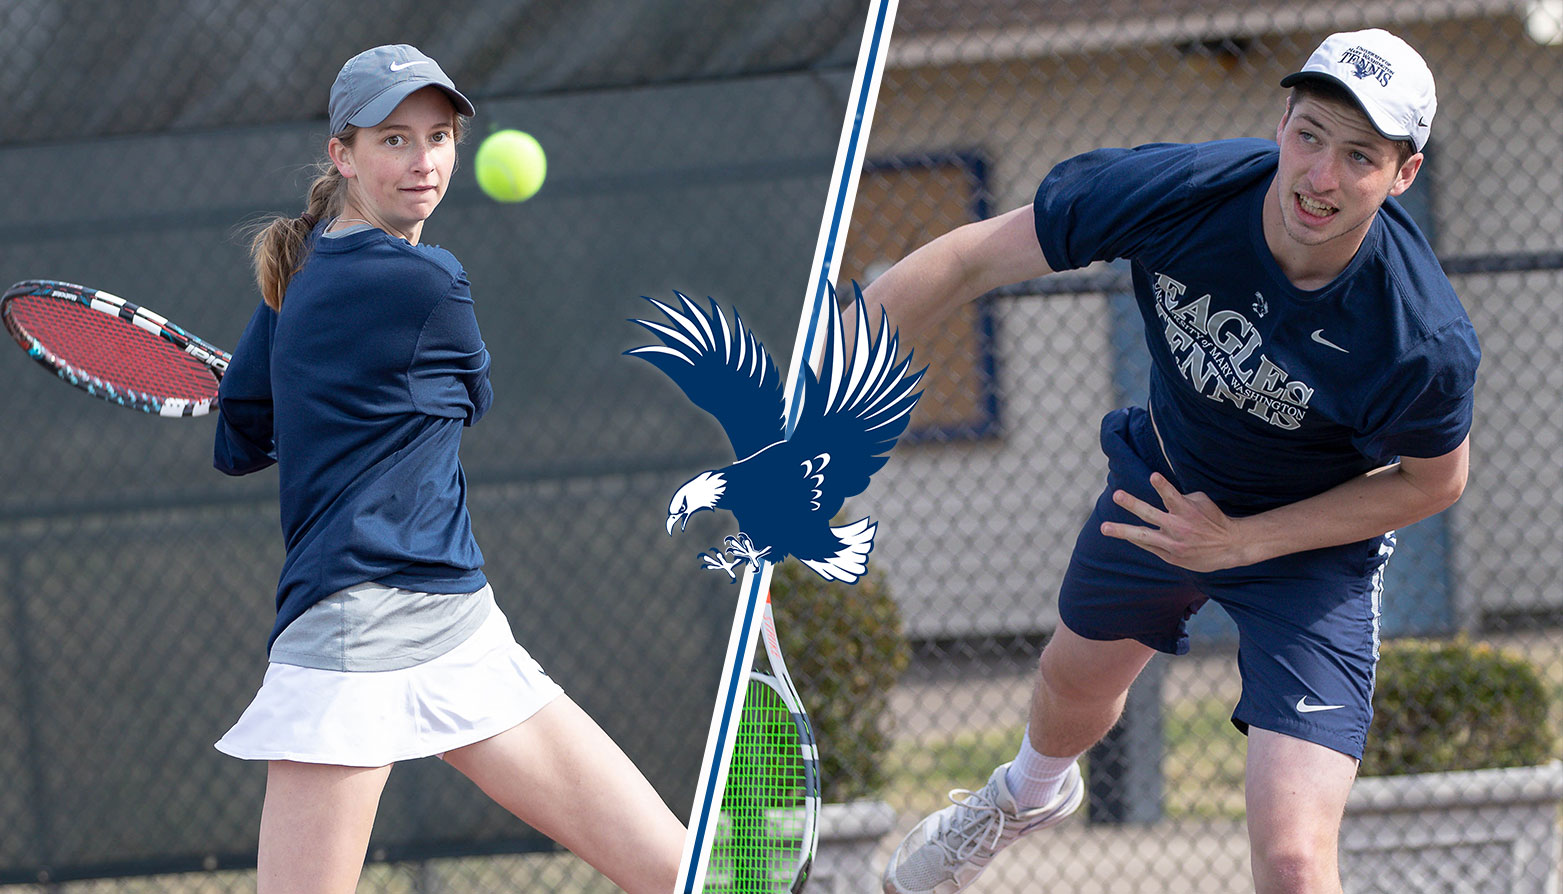 Mary Washington's Rachel Summers & Moses Hutchison Sweep CAC Tennis Player of the Week Honors Heading into CAC Tournament